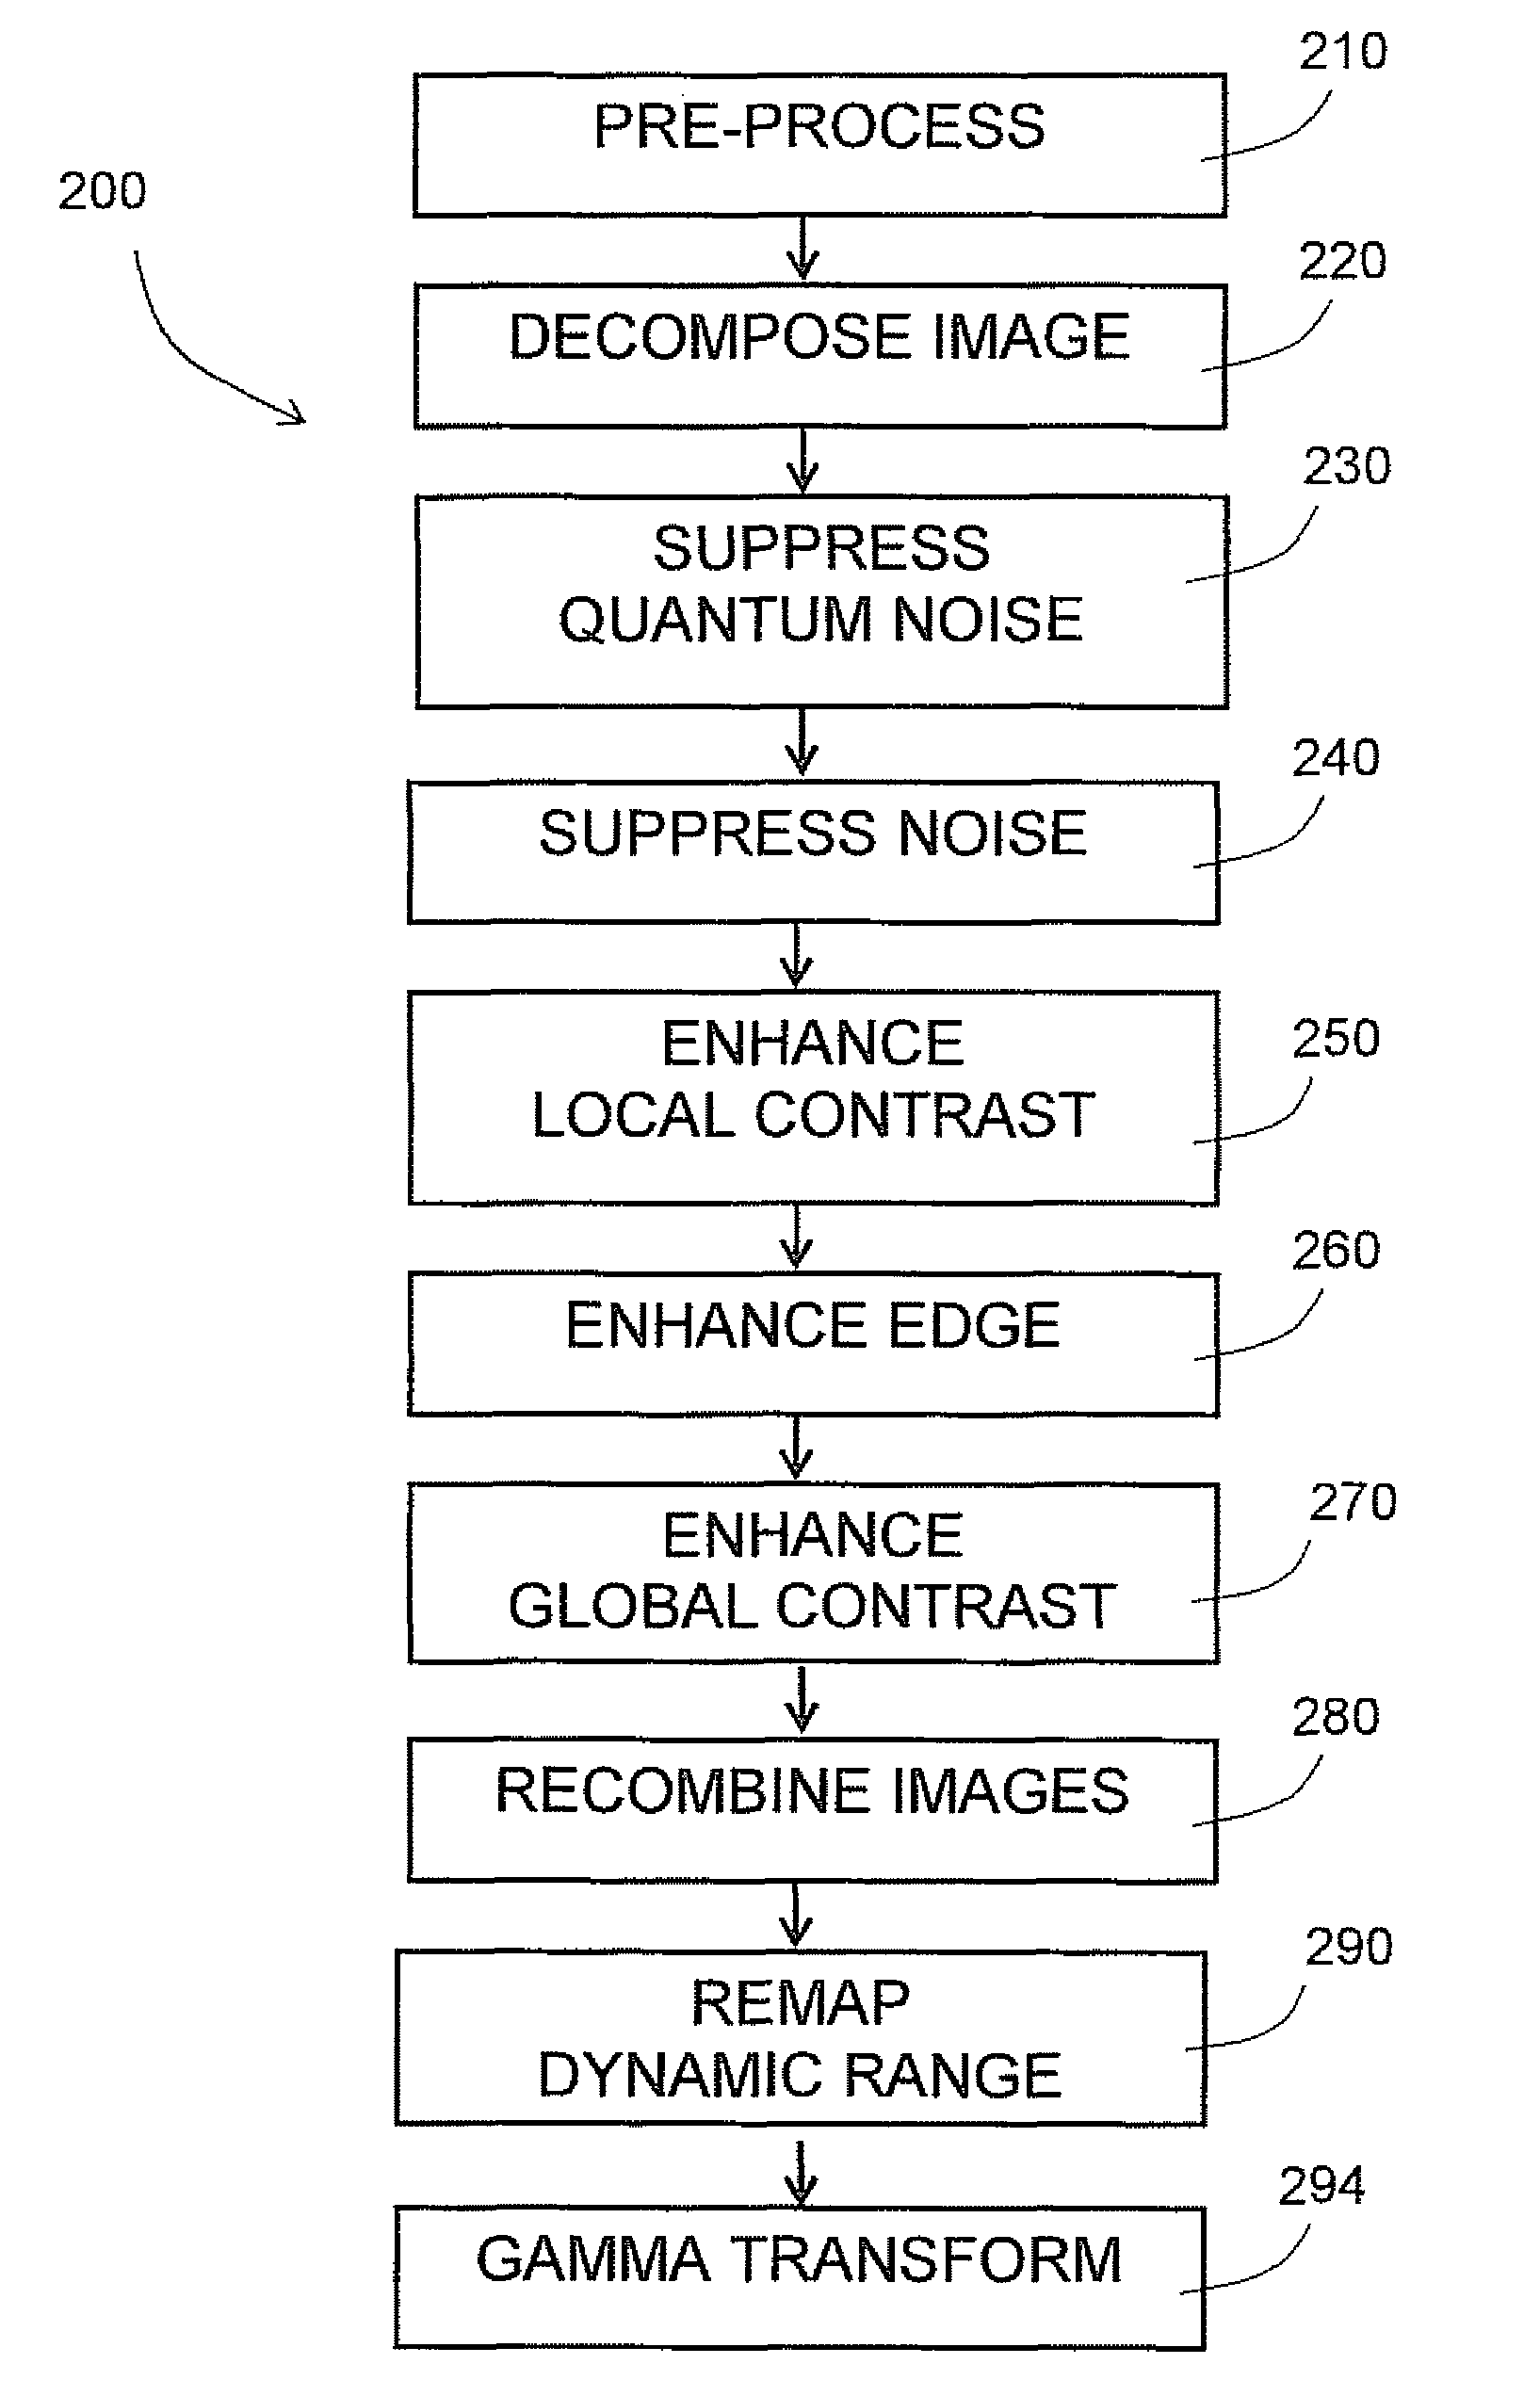 Method and system for enhancing digital images